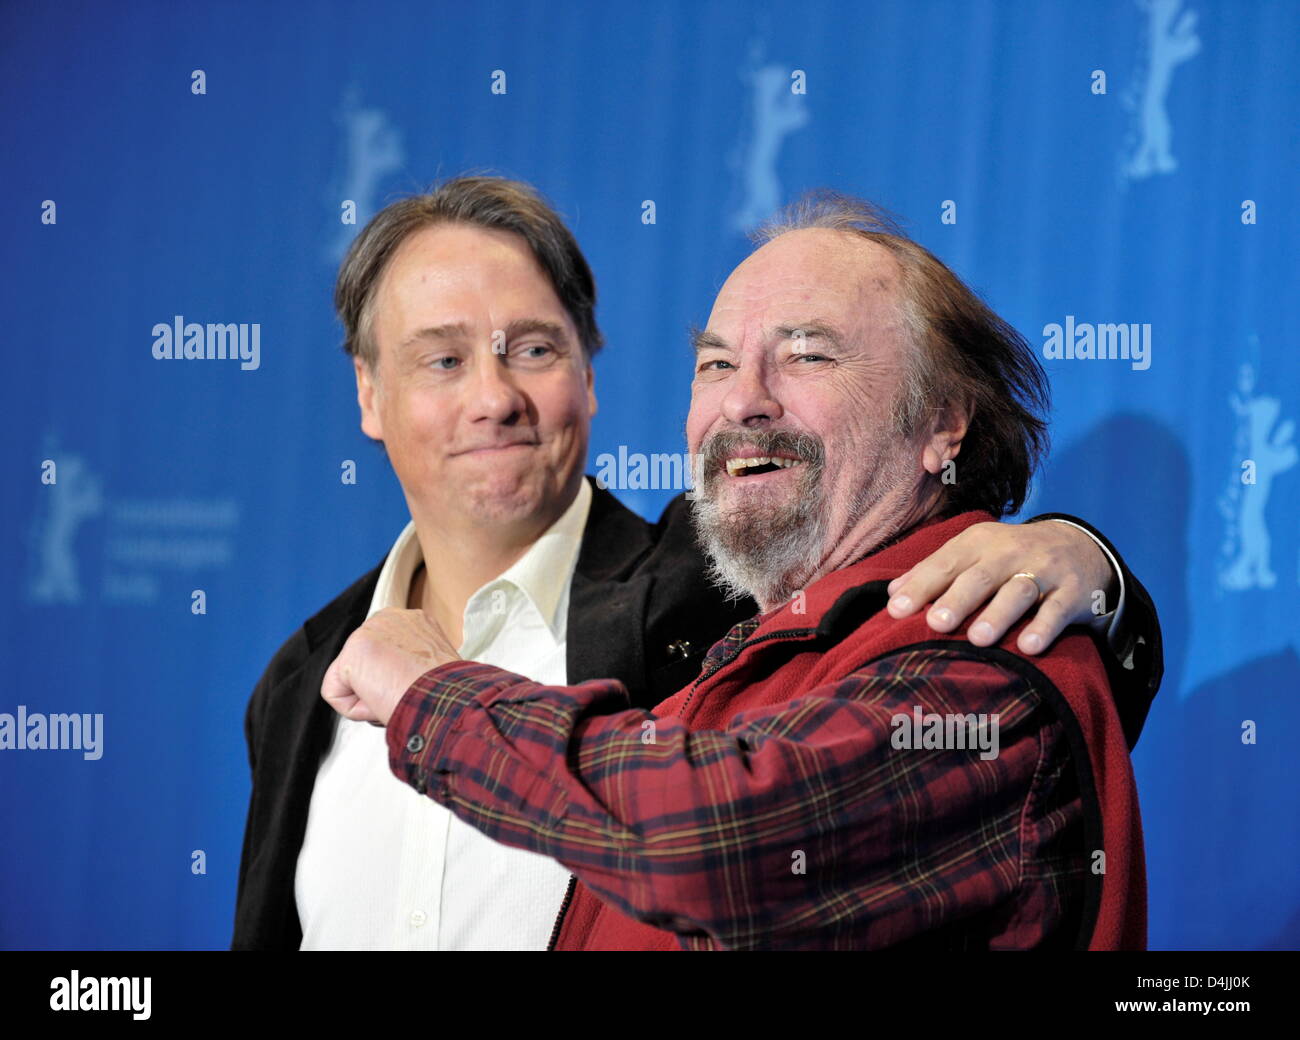 US-director Mitchell Lichtenstein (L) and US-actor Rip Torn pose during the photo call of the film ?Happy Tears? at the 59th Berlin International Film Festival in Berlin, Germany, 11 February 2009. The film is among the 18 films competing for the Silver and Golden Bear awards at the 59th Berlinale. Winners will be announced on 14 February. Photo: Gero Breloer Stock Photo